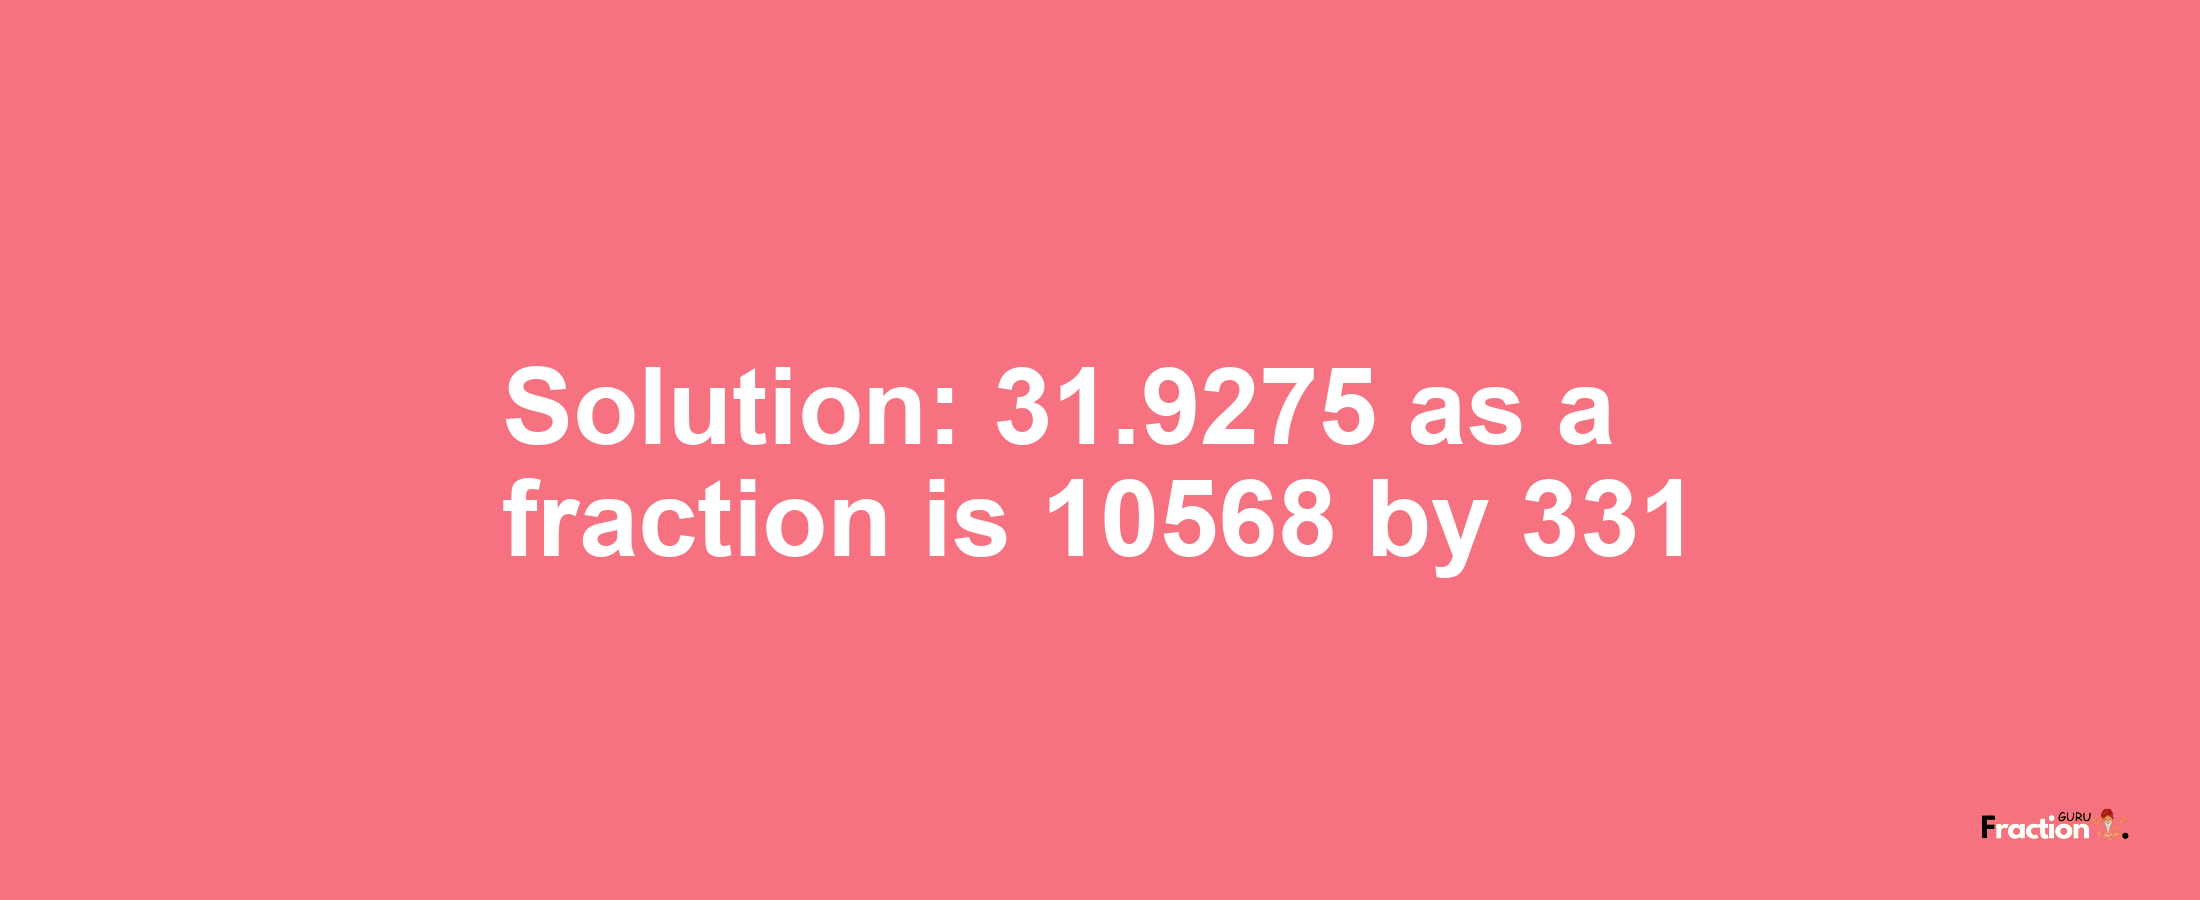 Solution:31.9275 as a fraction is 10568/331